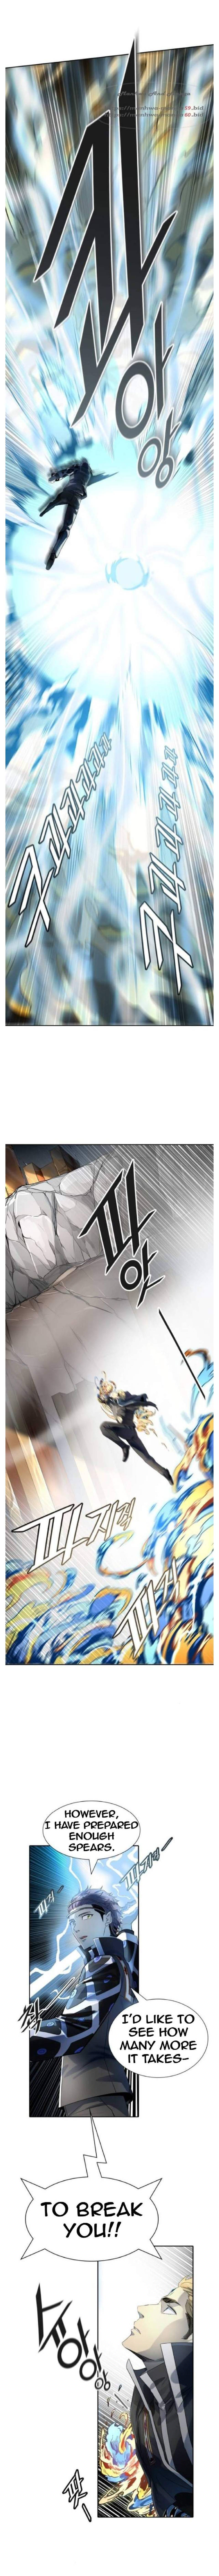 tower of god chapter 523